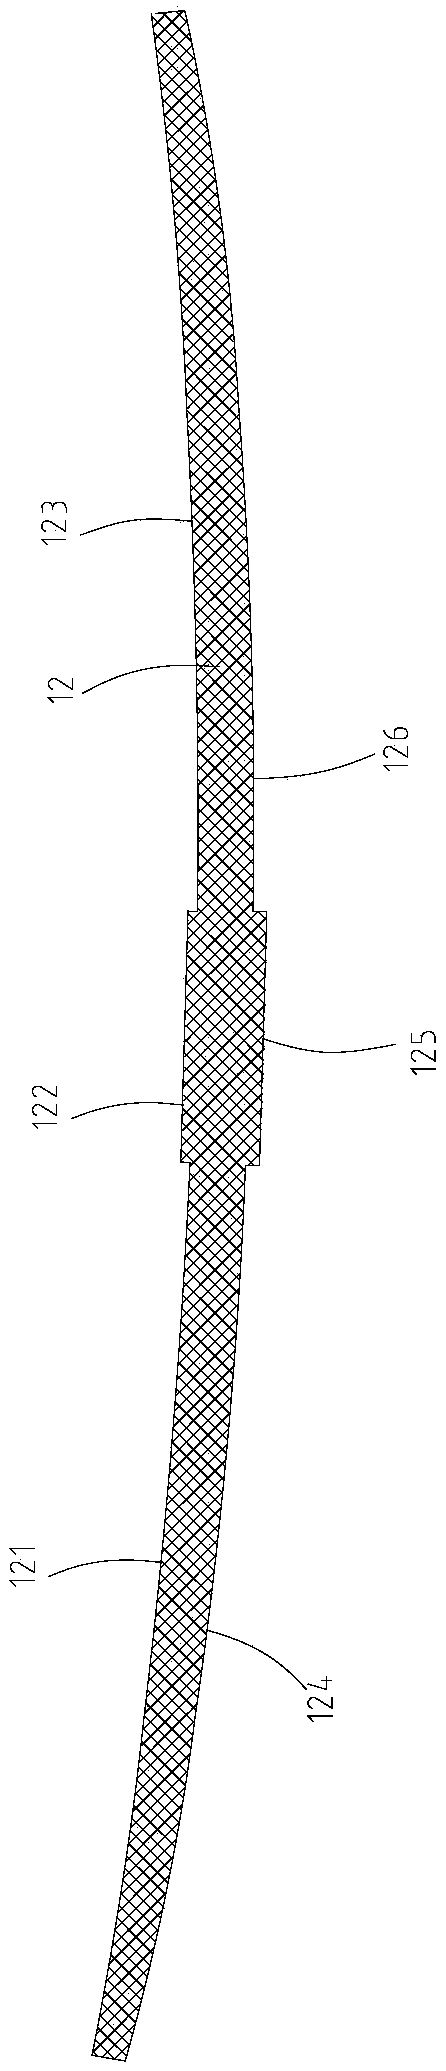 Gradient stiffness leaf springs, leaf spring suspension systems and vehicles